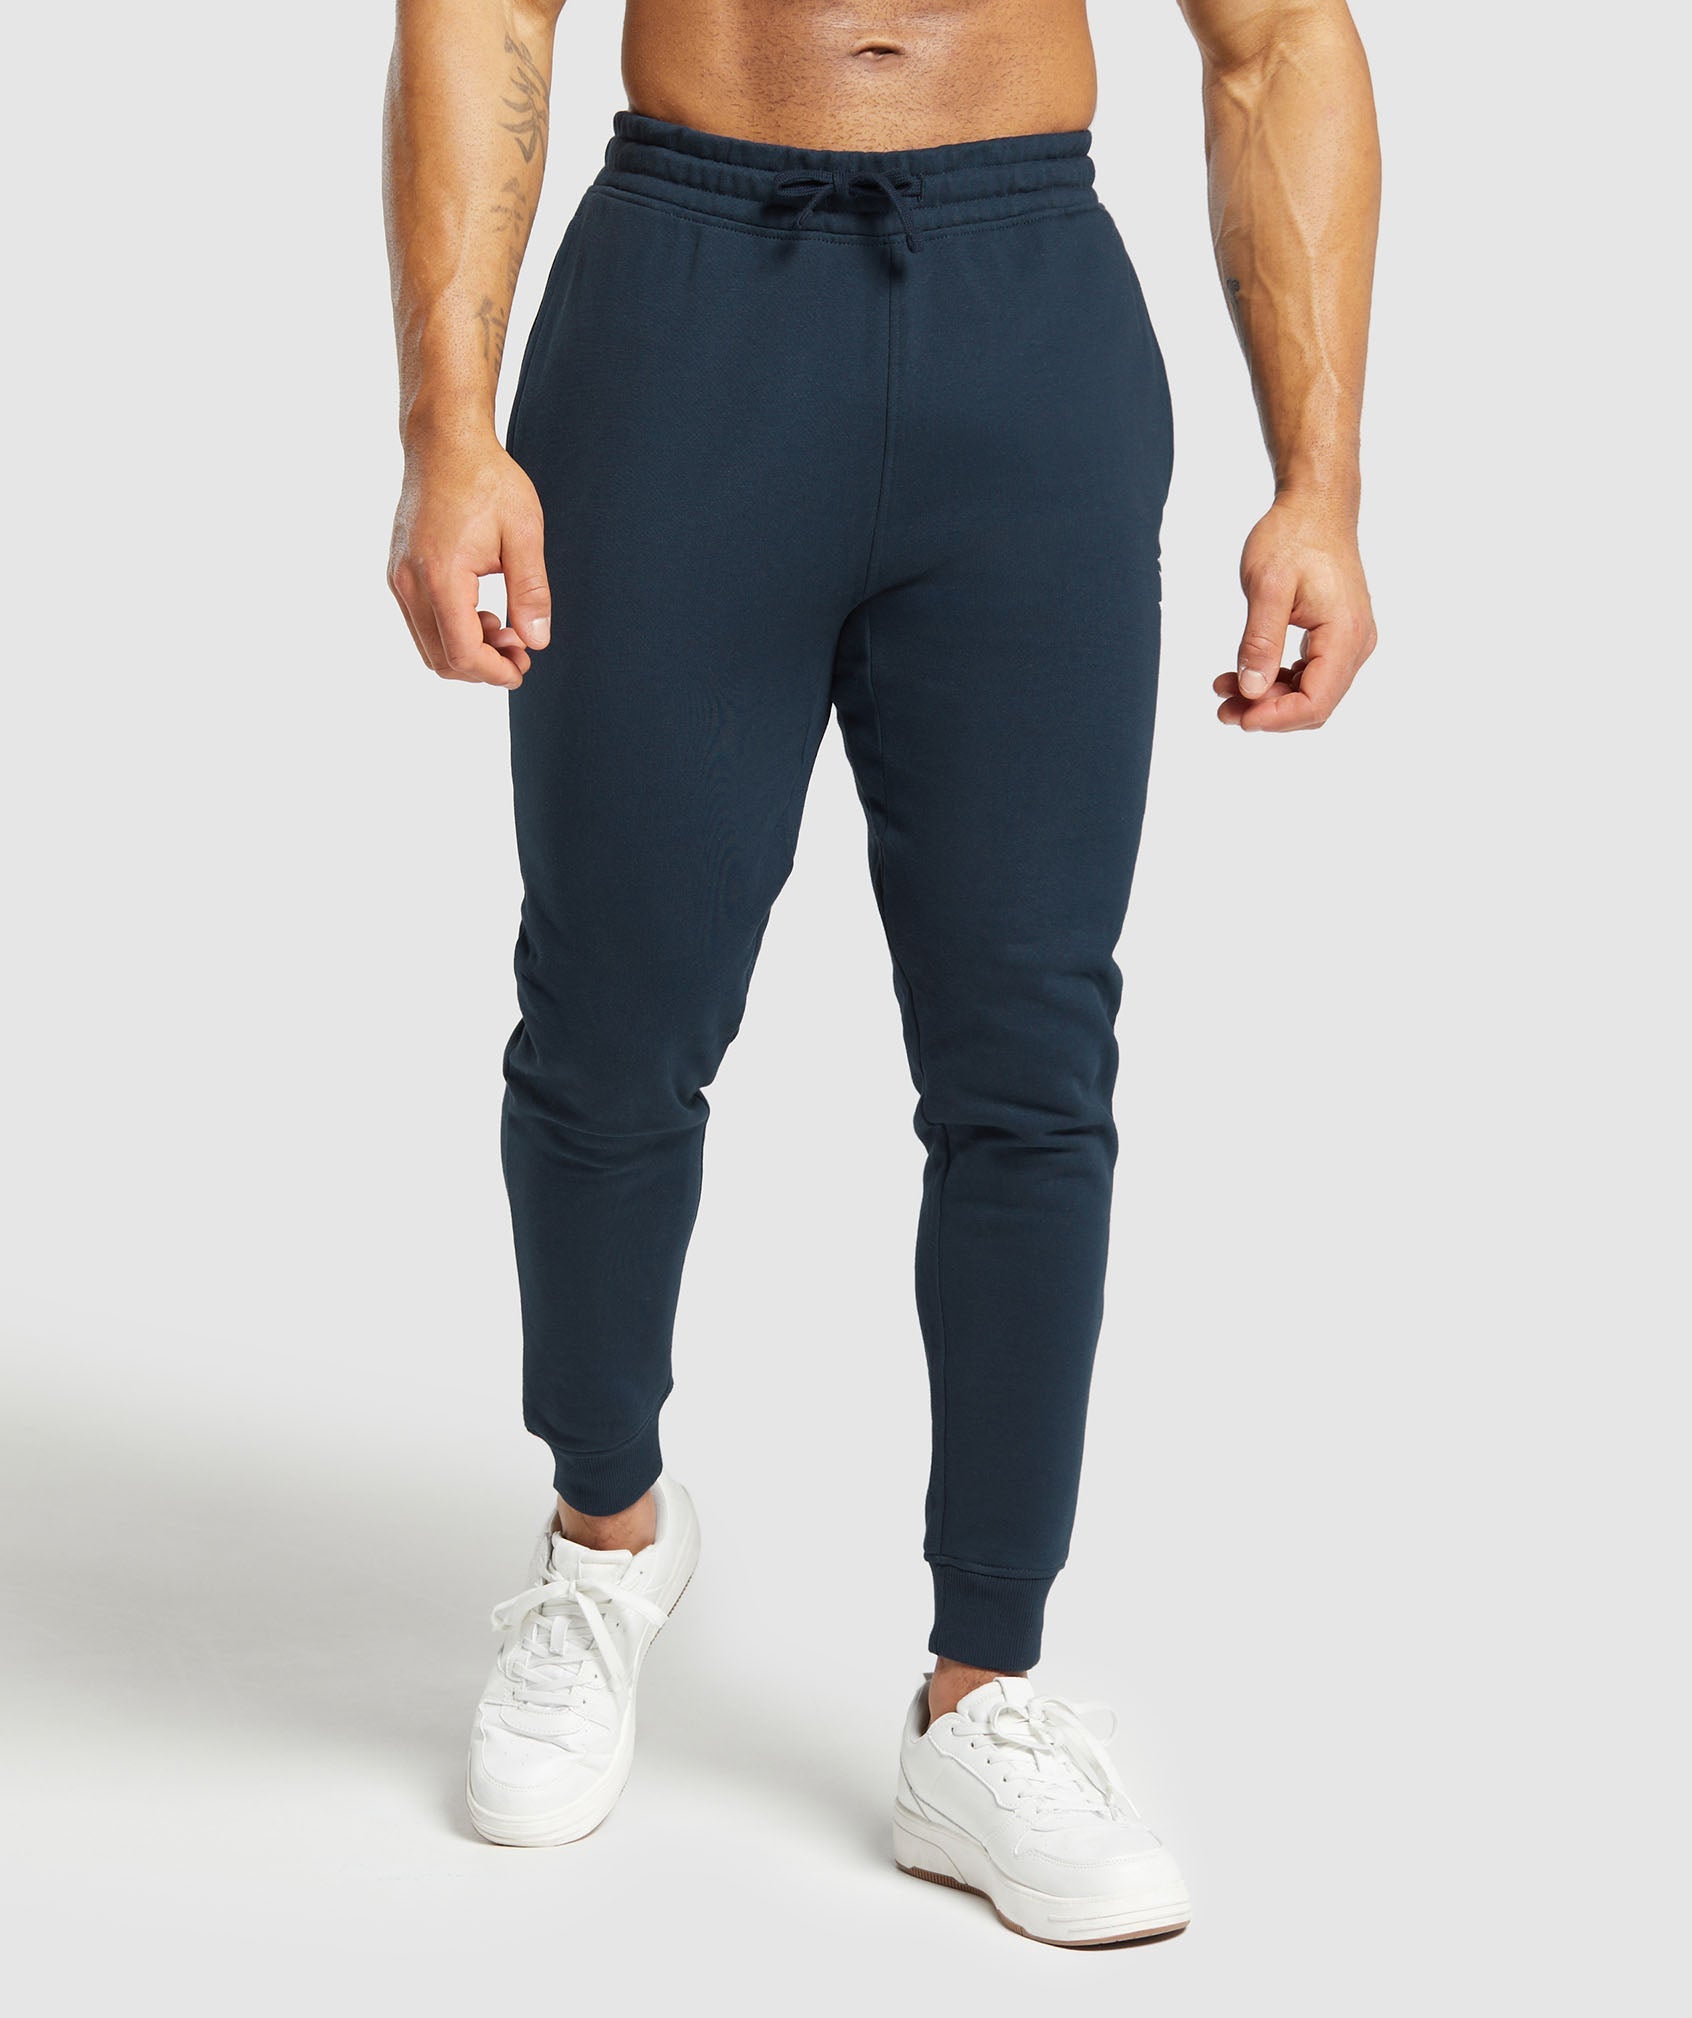 stetic wearing @gymshark Crest Straight Leg Joggers (size L) code STARR 10%